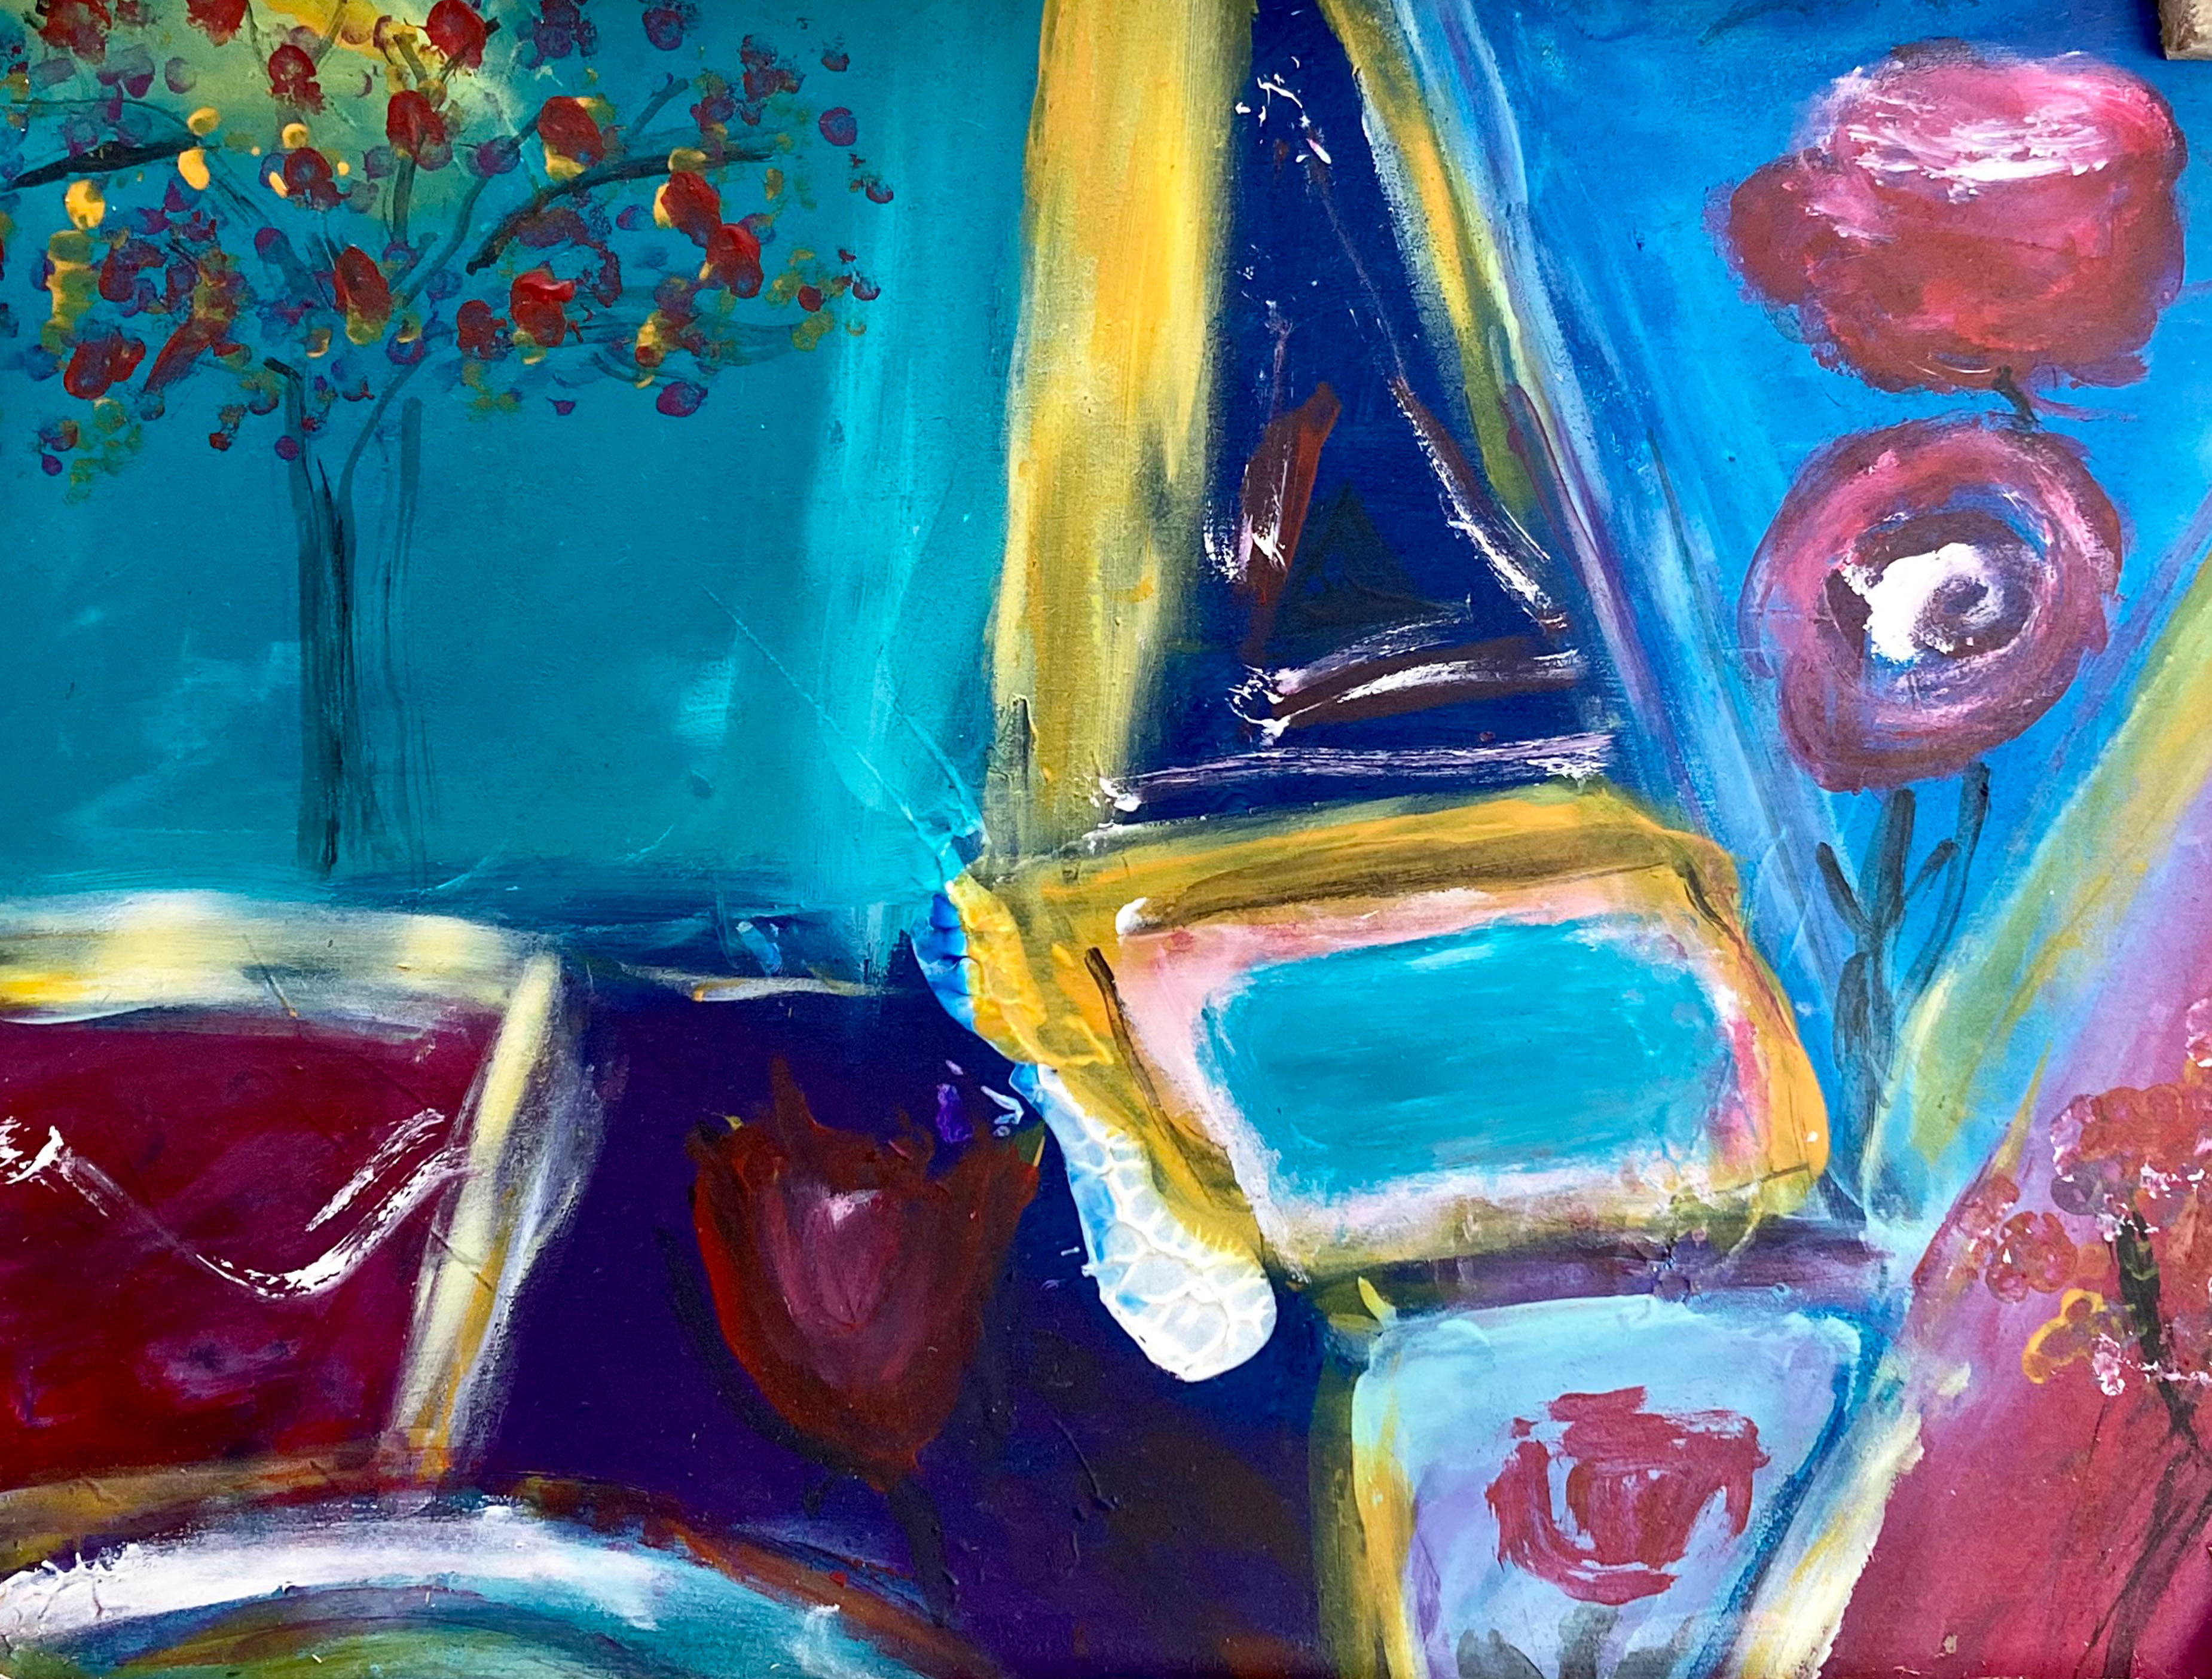 A colourful abstract interior painting.